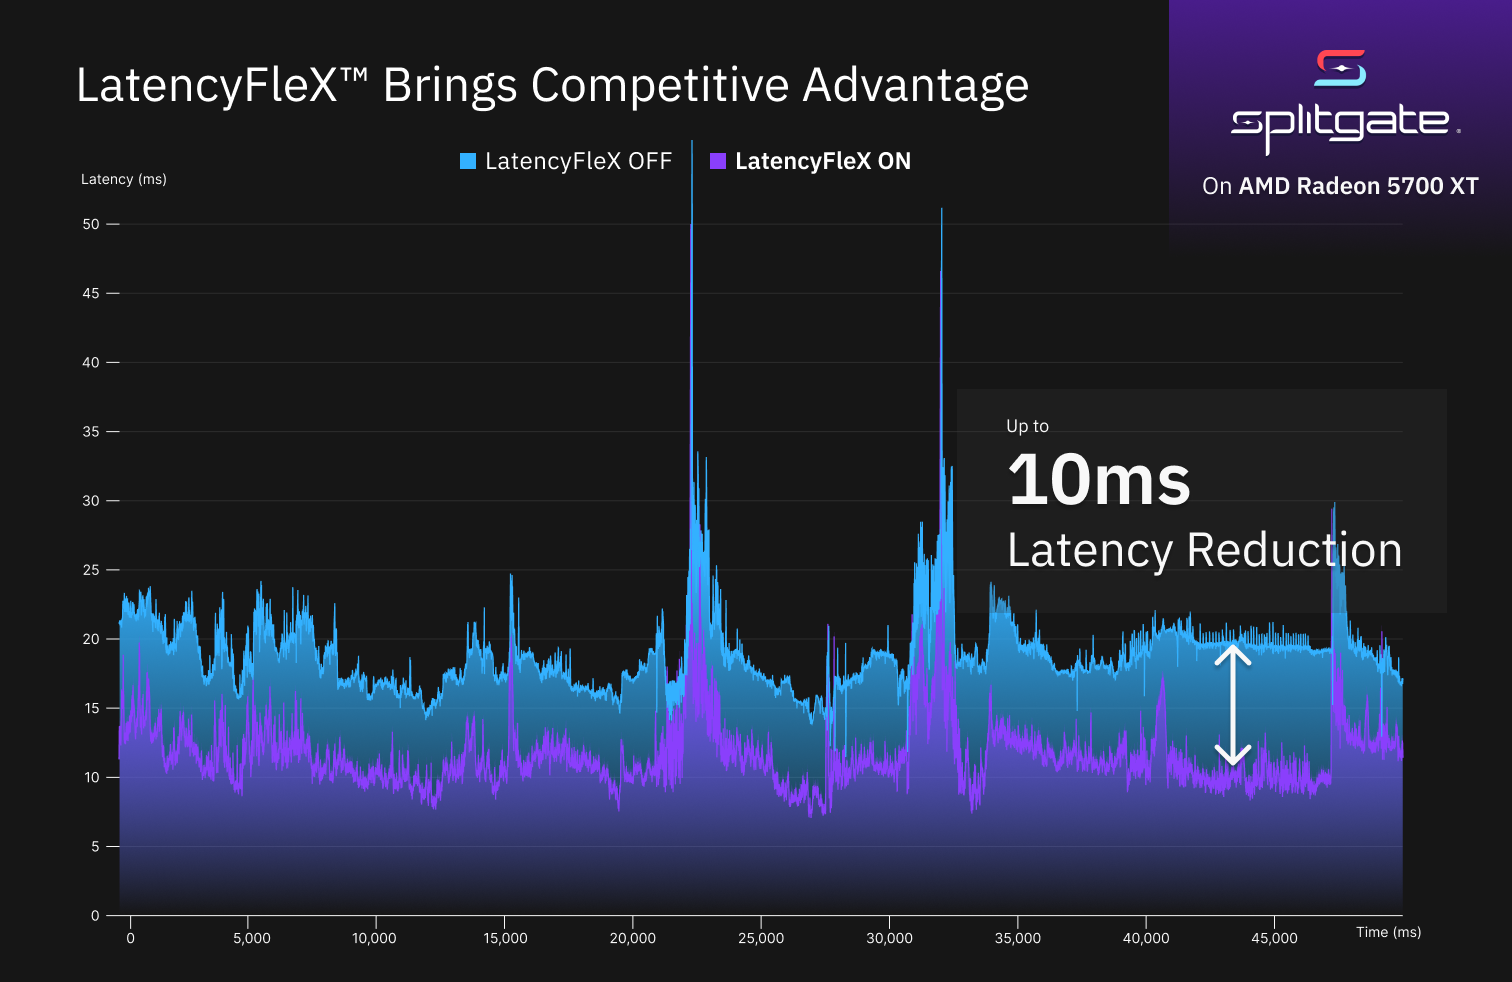 LatencyFleX brings competitive advantage with up to 10ms latency reduction